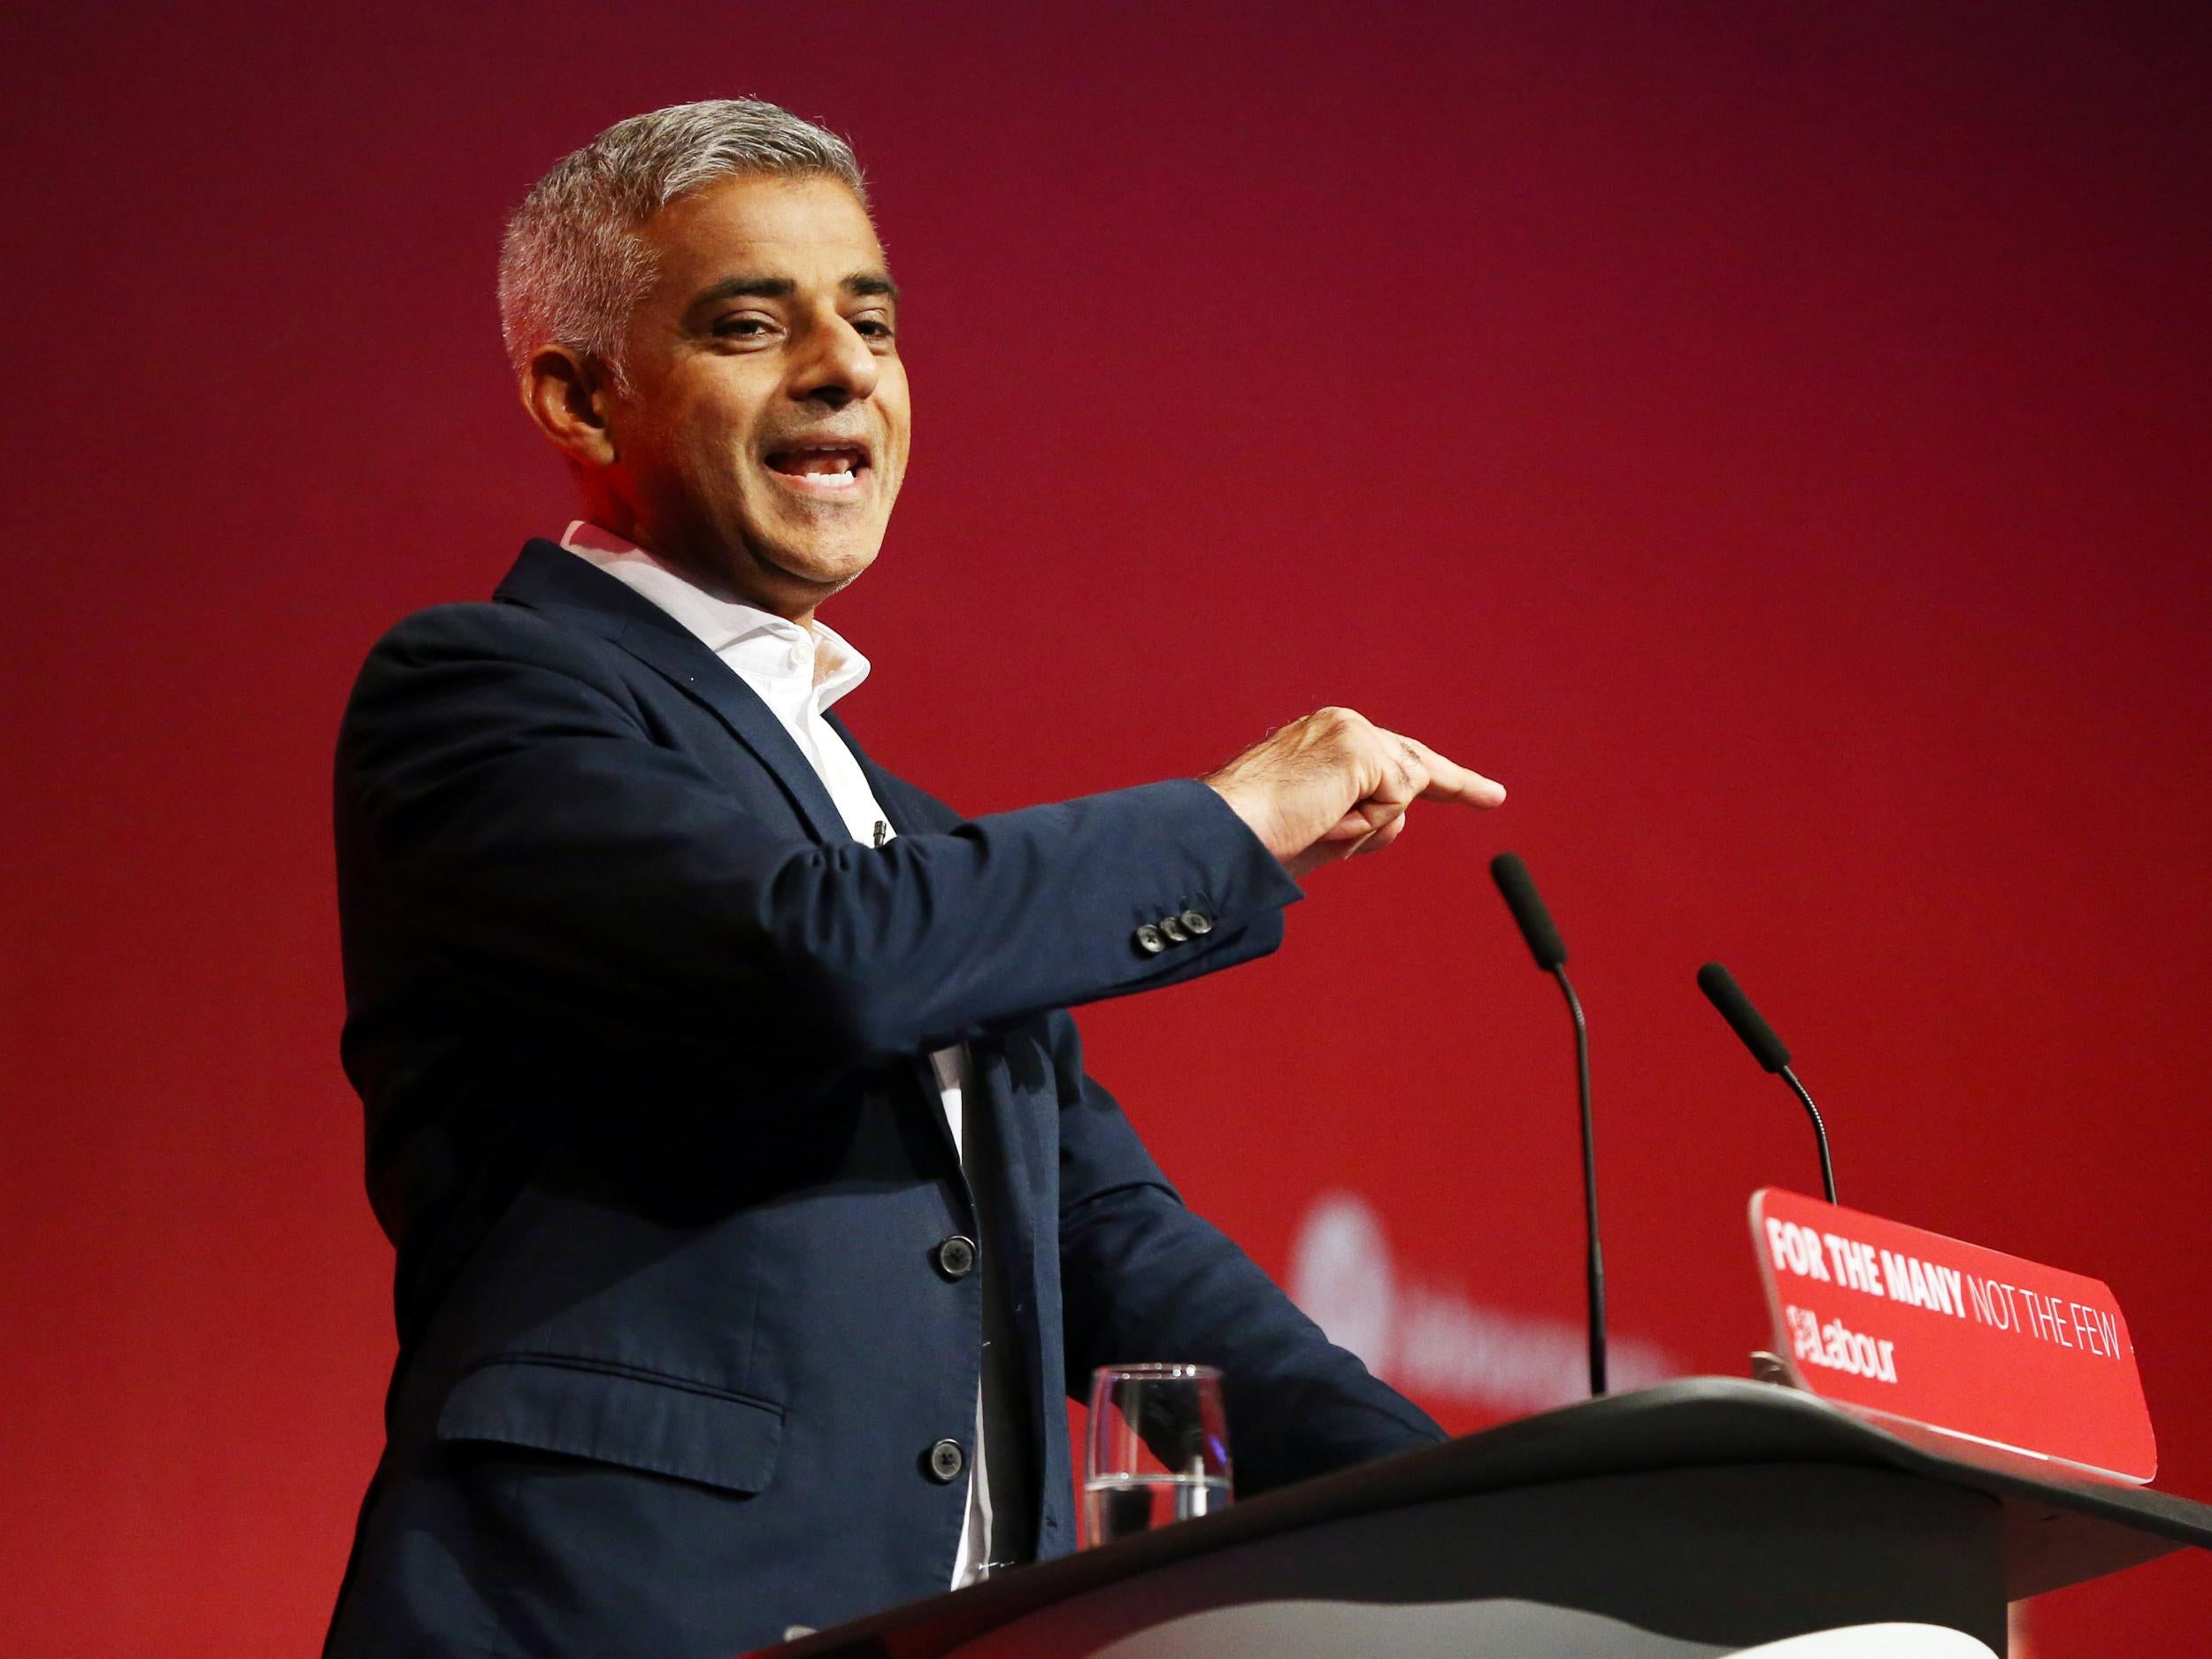 Sadiq Khan may have to edit his estate regeneration guidelines following Corbyn's speech